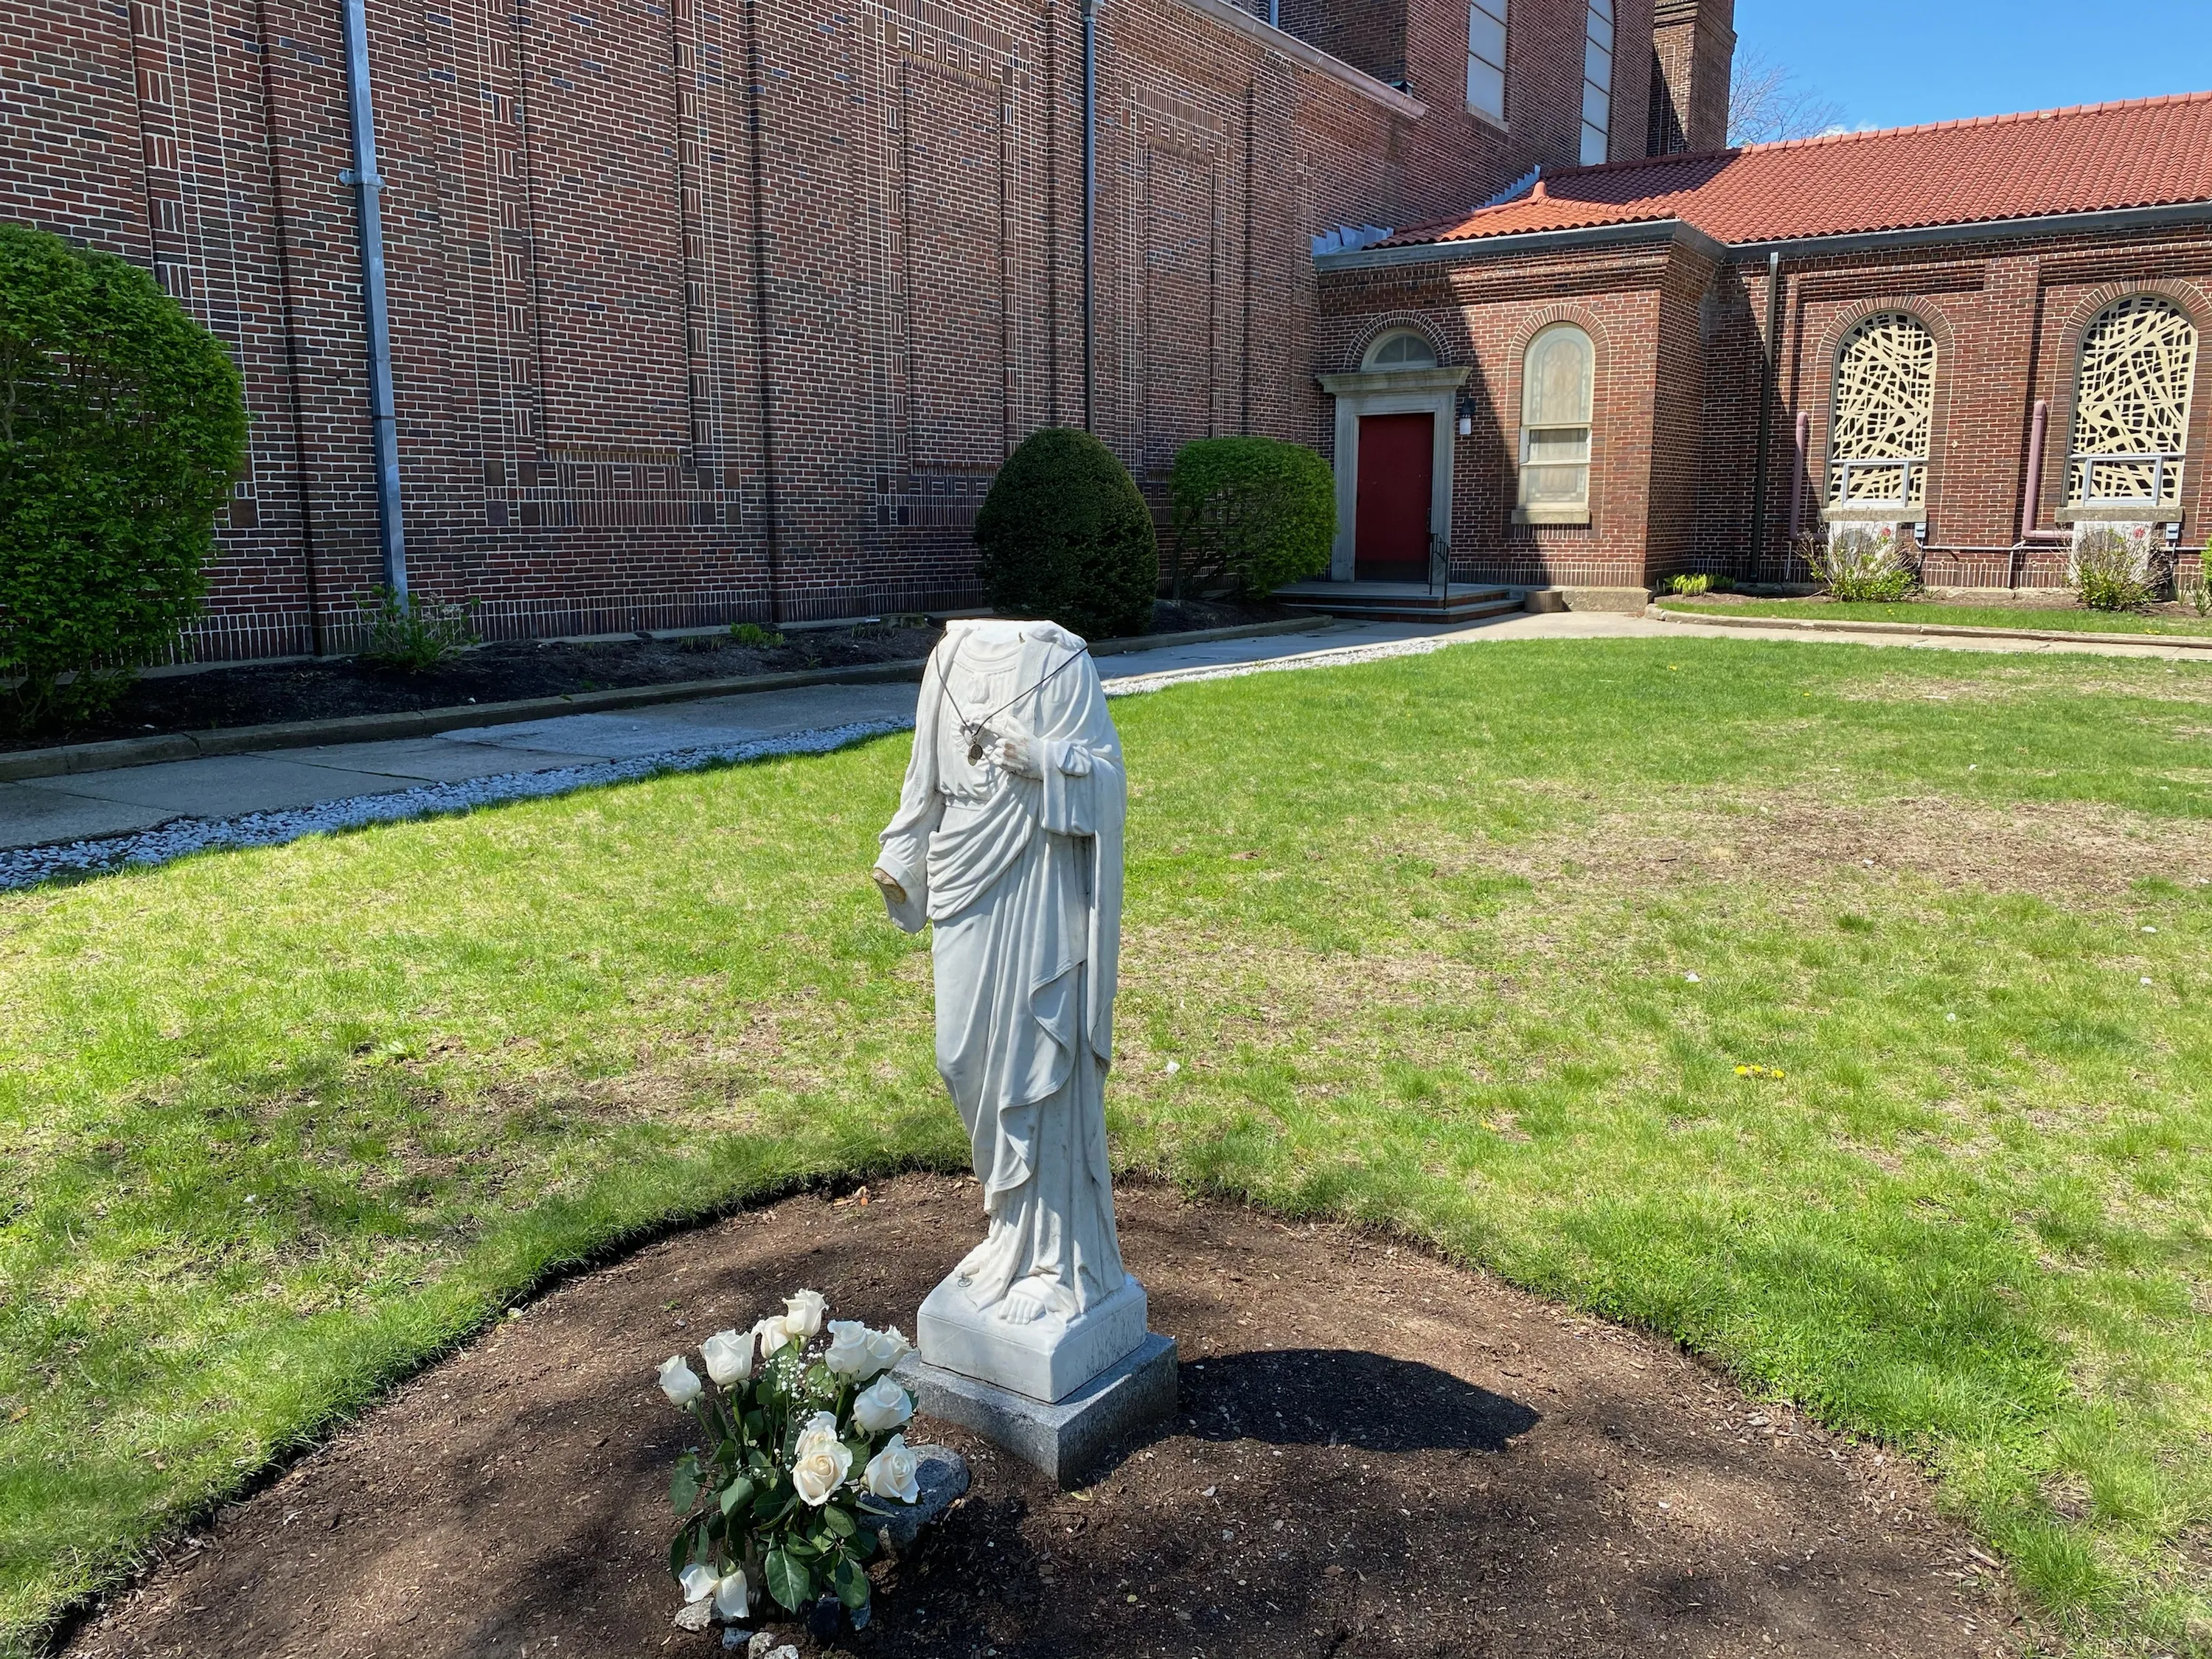 A statue of Christ at St. Charles Borromeo parish in Waltham, Mass., that was vandalized May 2-3, 2021.?w=200&h=150